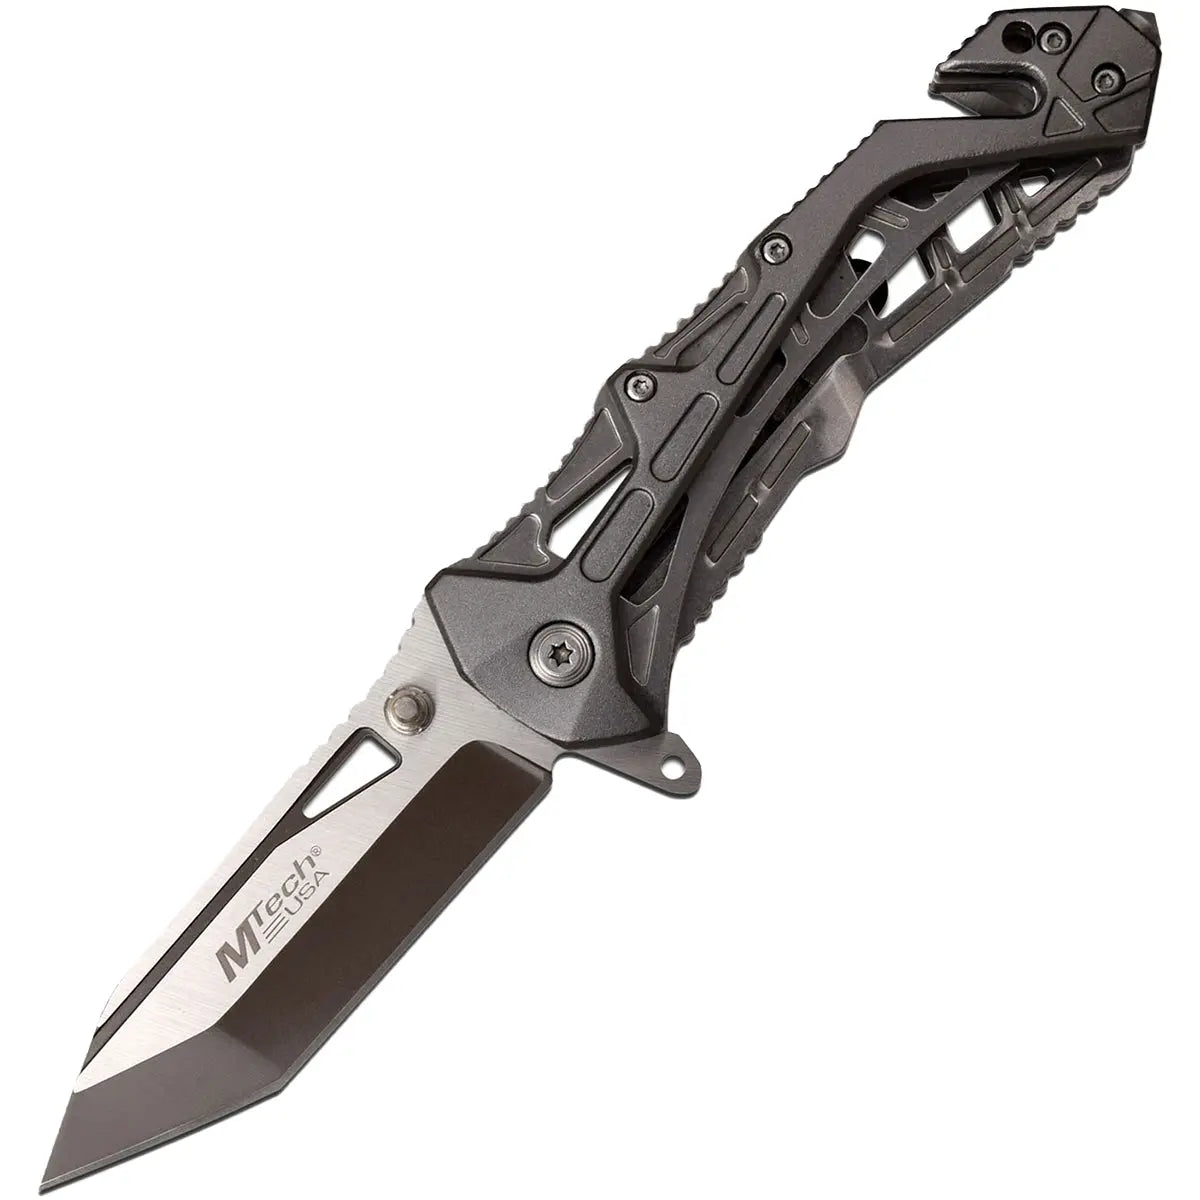 MTech USA Linerlock Spring Assisted Tanto Folding Knife Gray Anodized MT-A997BGY M-Tech